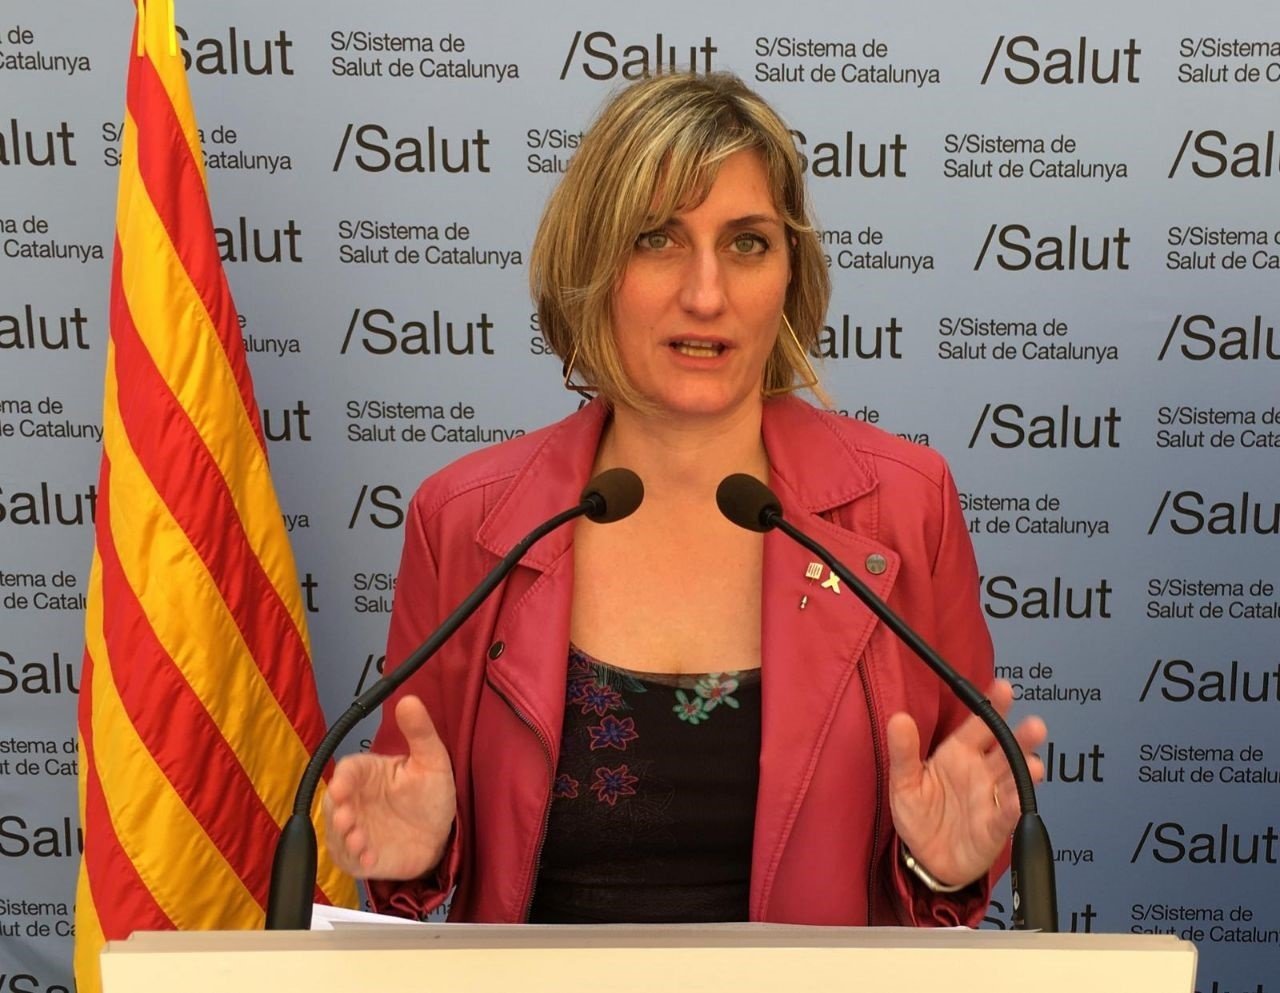 Catalan health ministry announces guidelines for a "safe de-escalation" of the lockdown